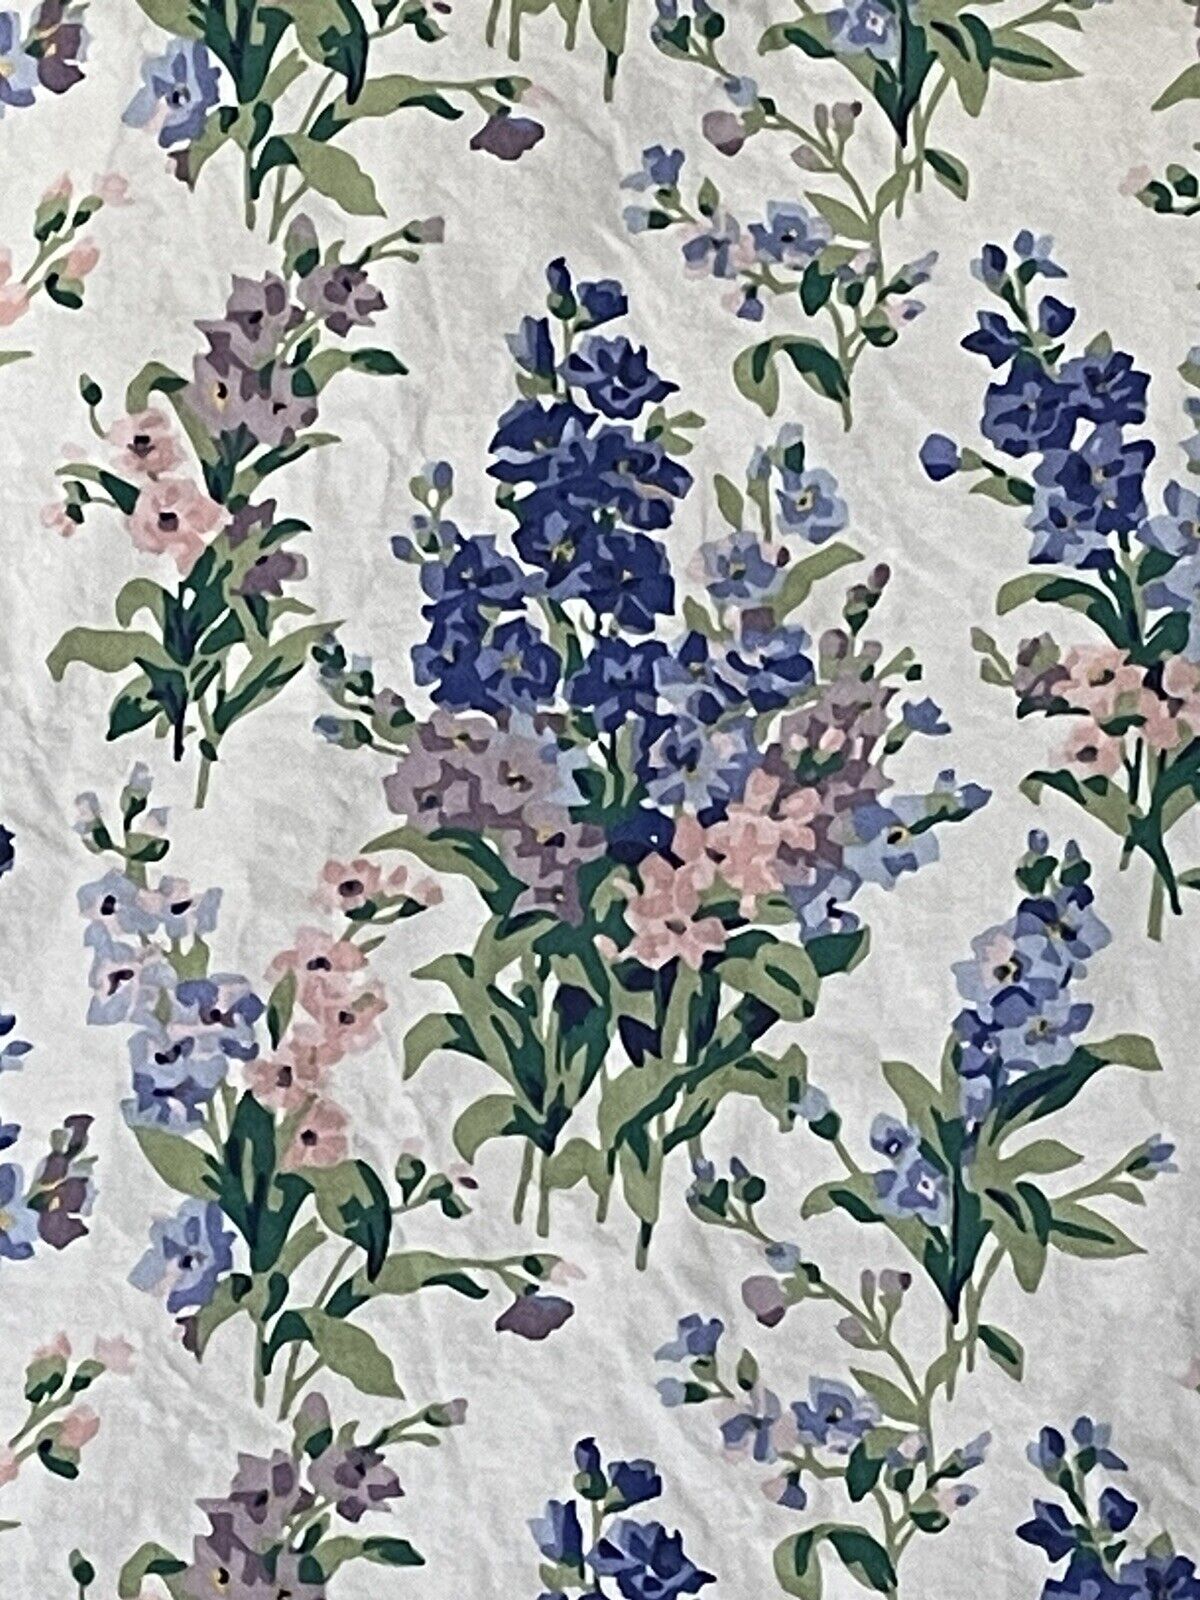 Vintage Laura Ashley Interiors Fabric ENGLISH COUNTRY PRINT Approx 2-1/2 Yards